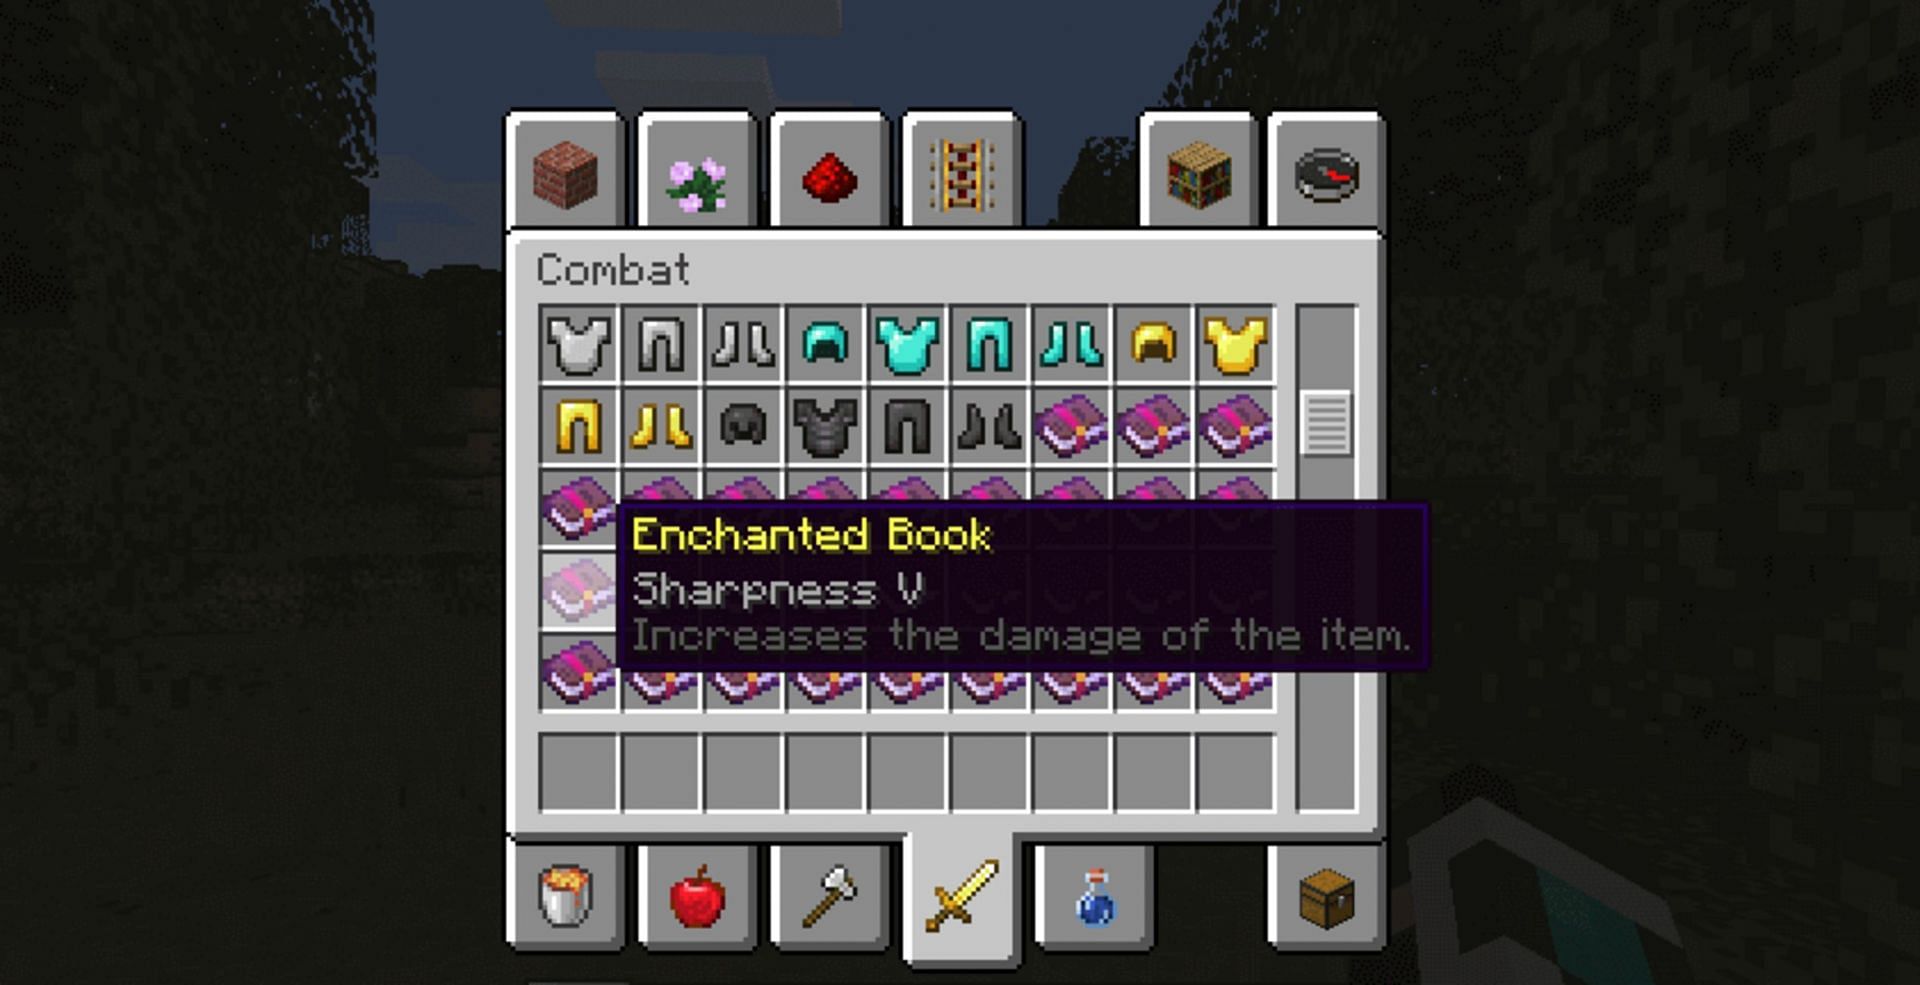 Enchantment Descriptions is a helpful and simple quality-of-life improvement (Image via DarkhaxDev/CurseForge)